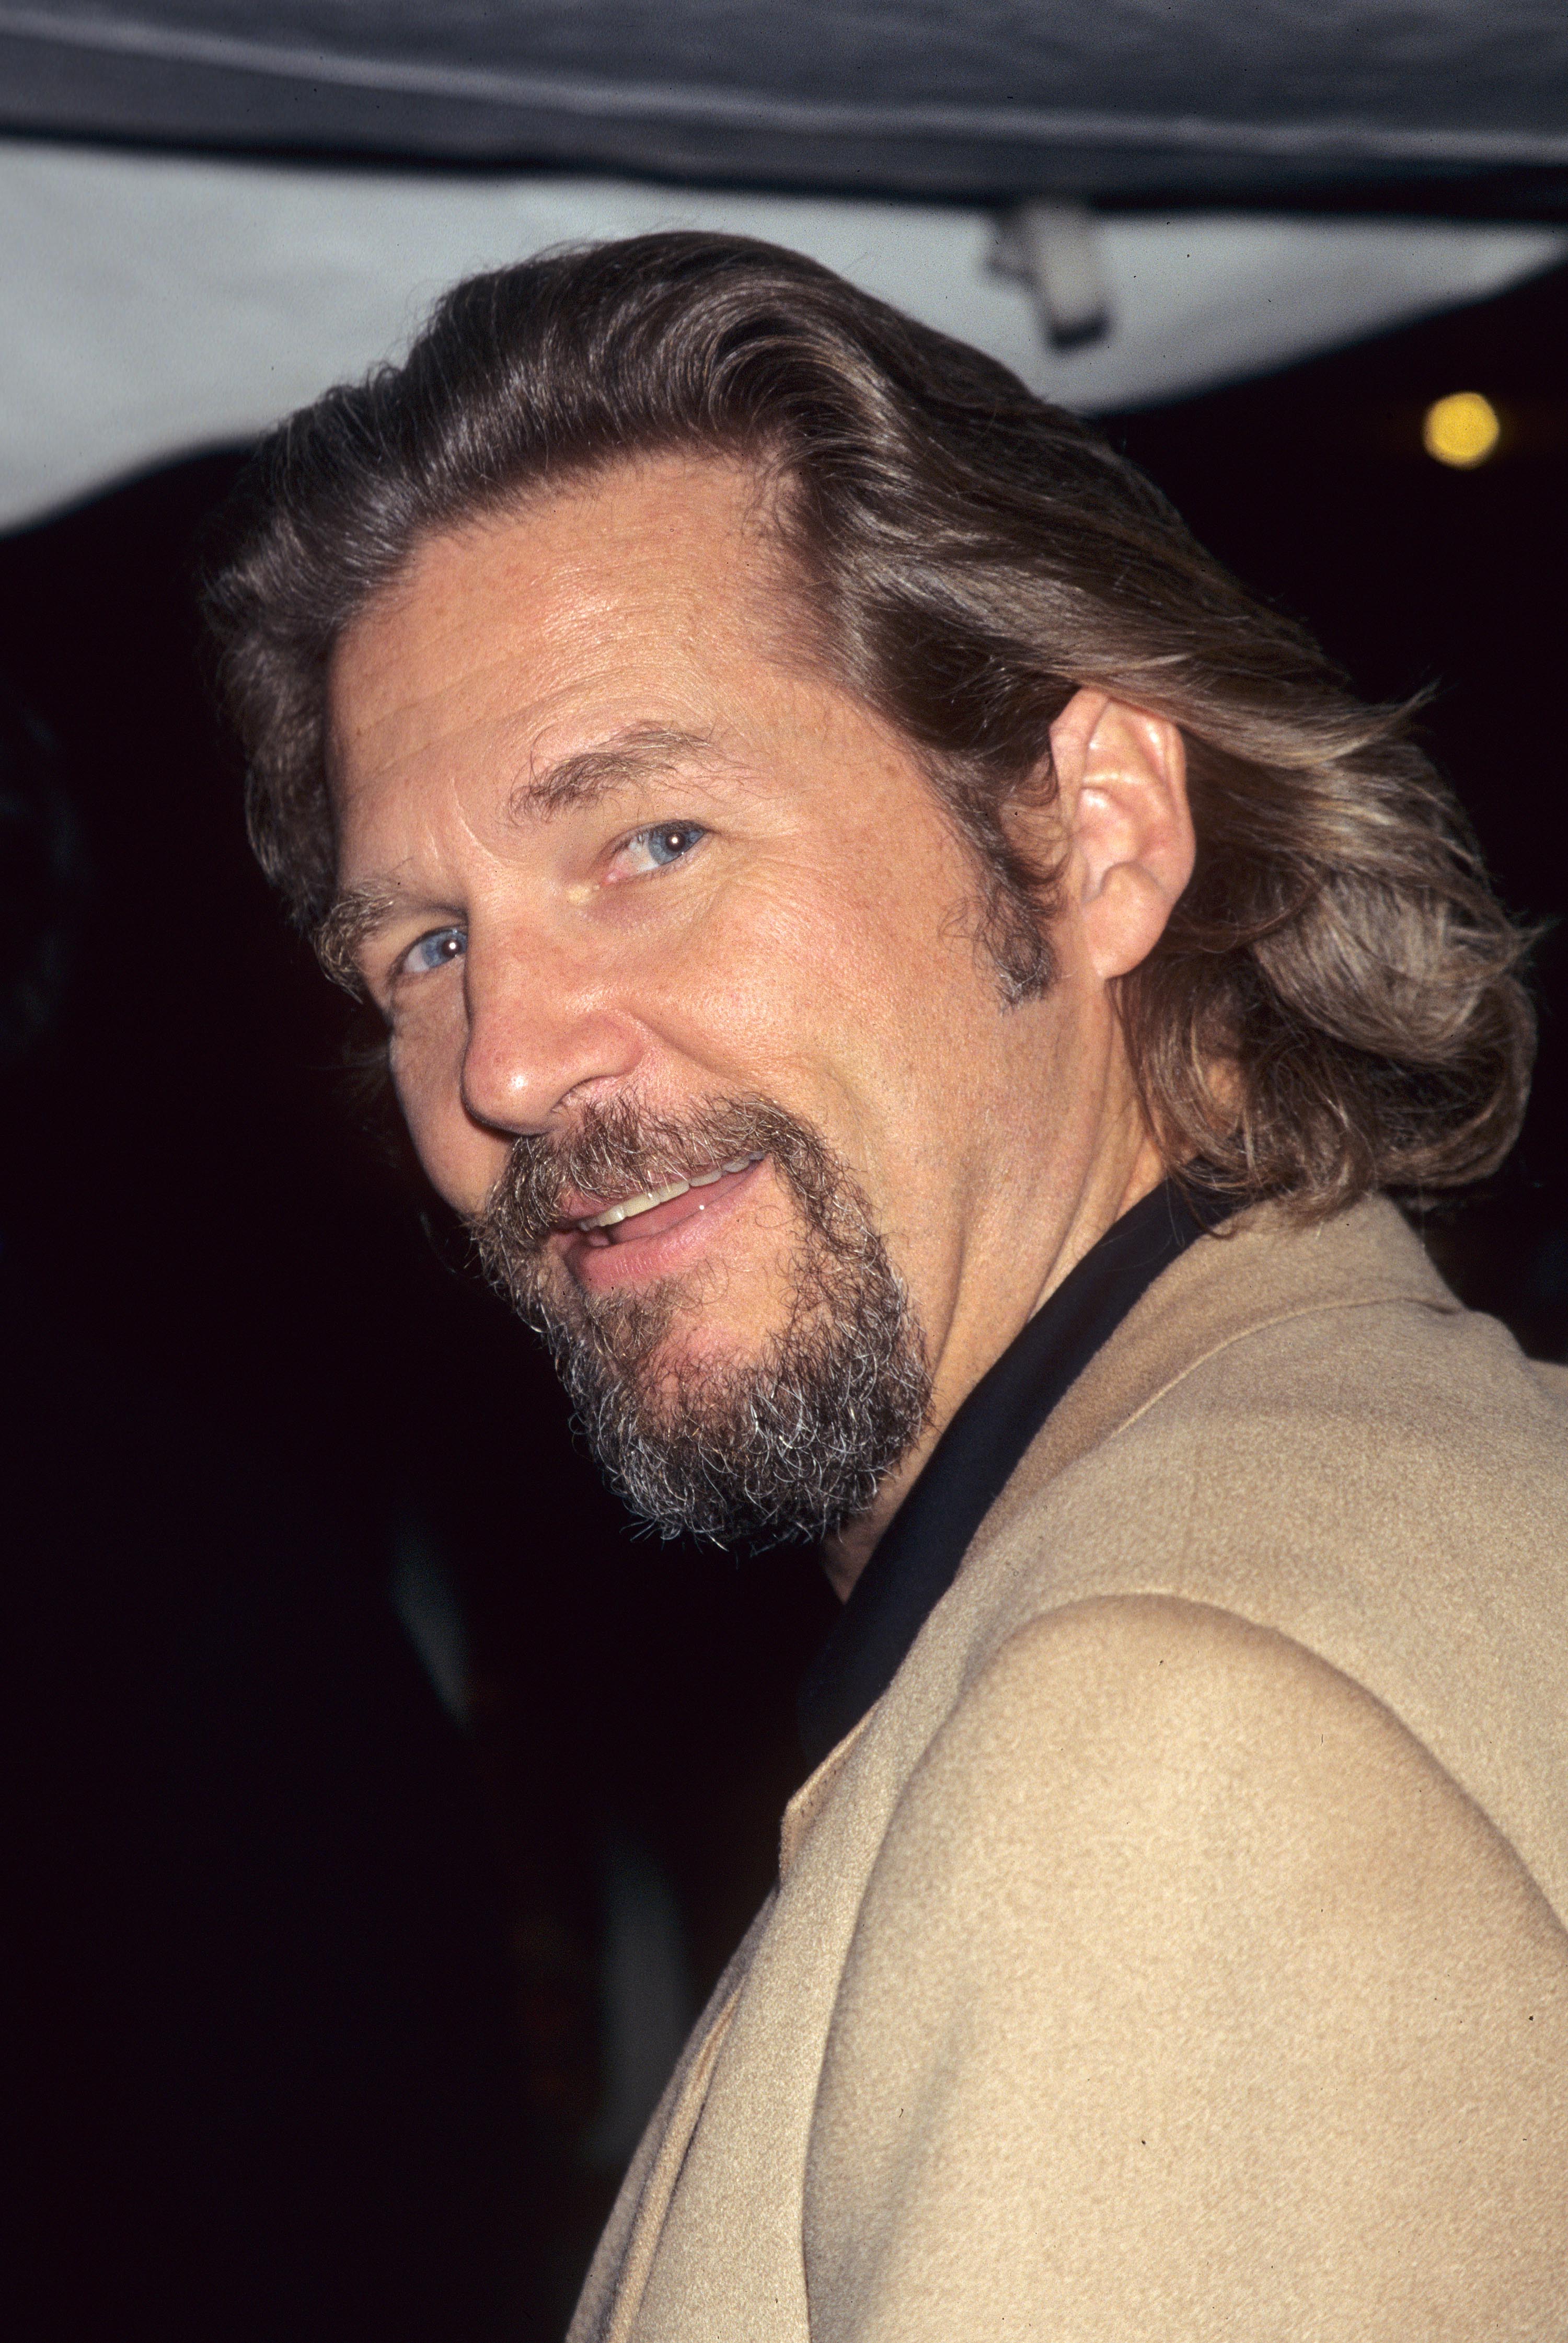 The movie star during the premiere of "The Mirror Has Two Faces" in New York City, on November 10, 1996. | Source: Getty Images